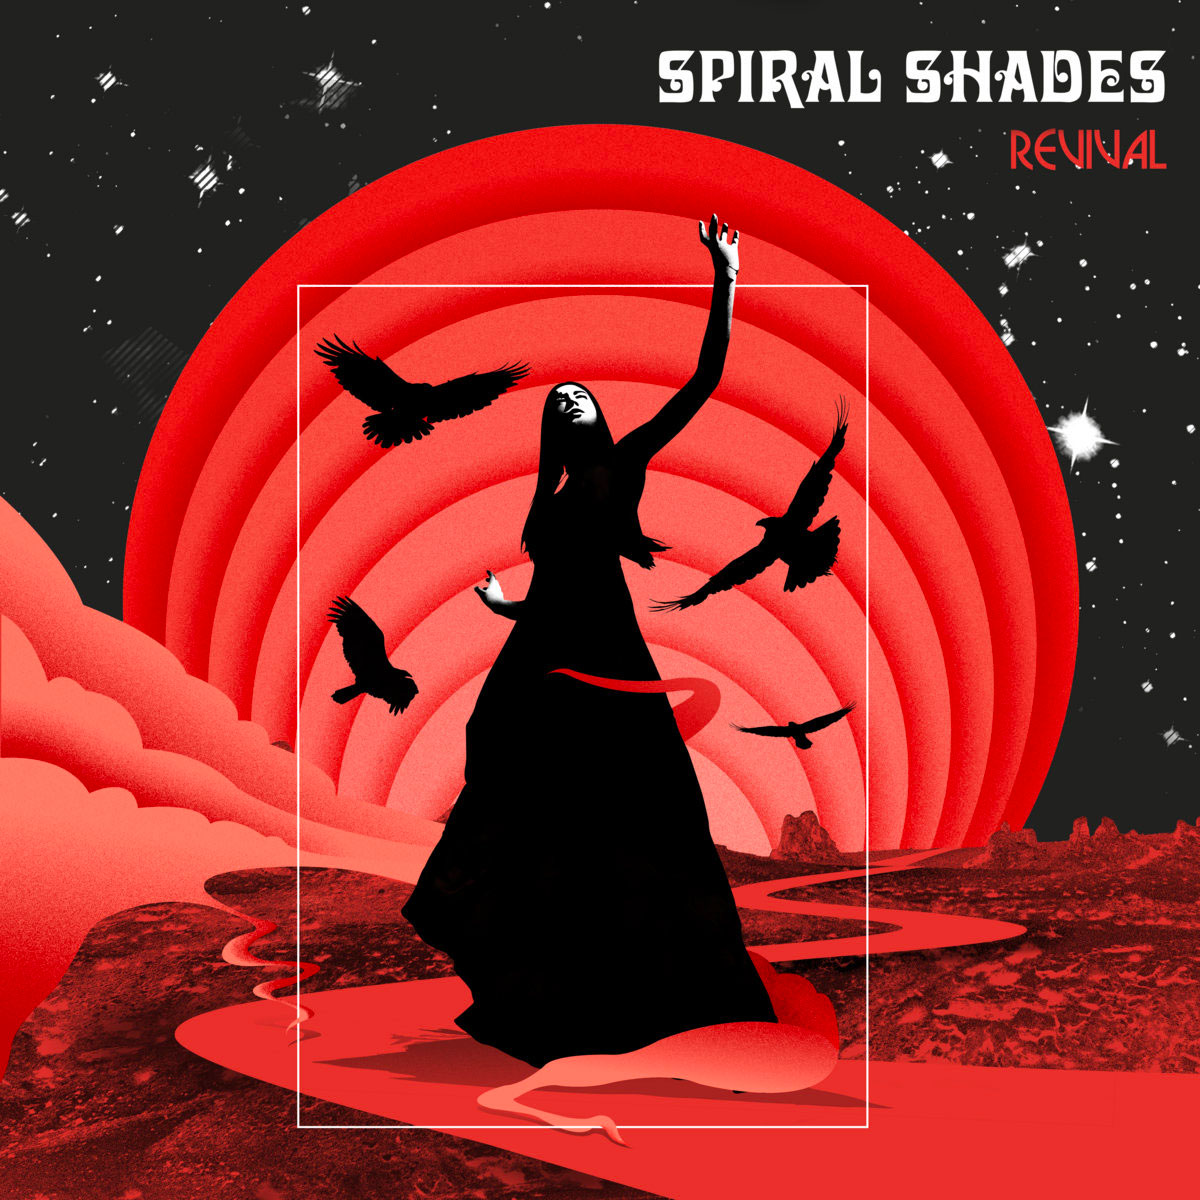 Revival by Spiral Shades